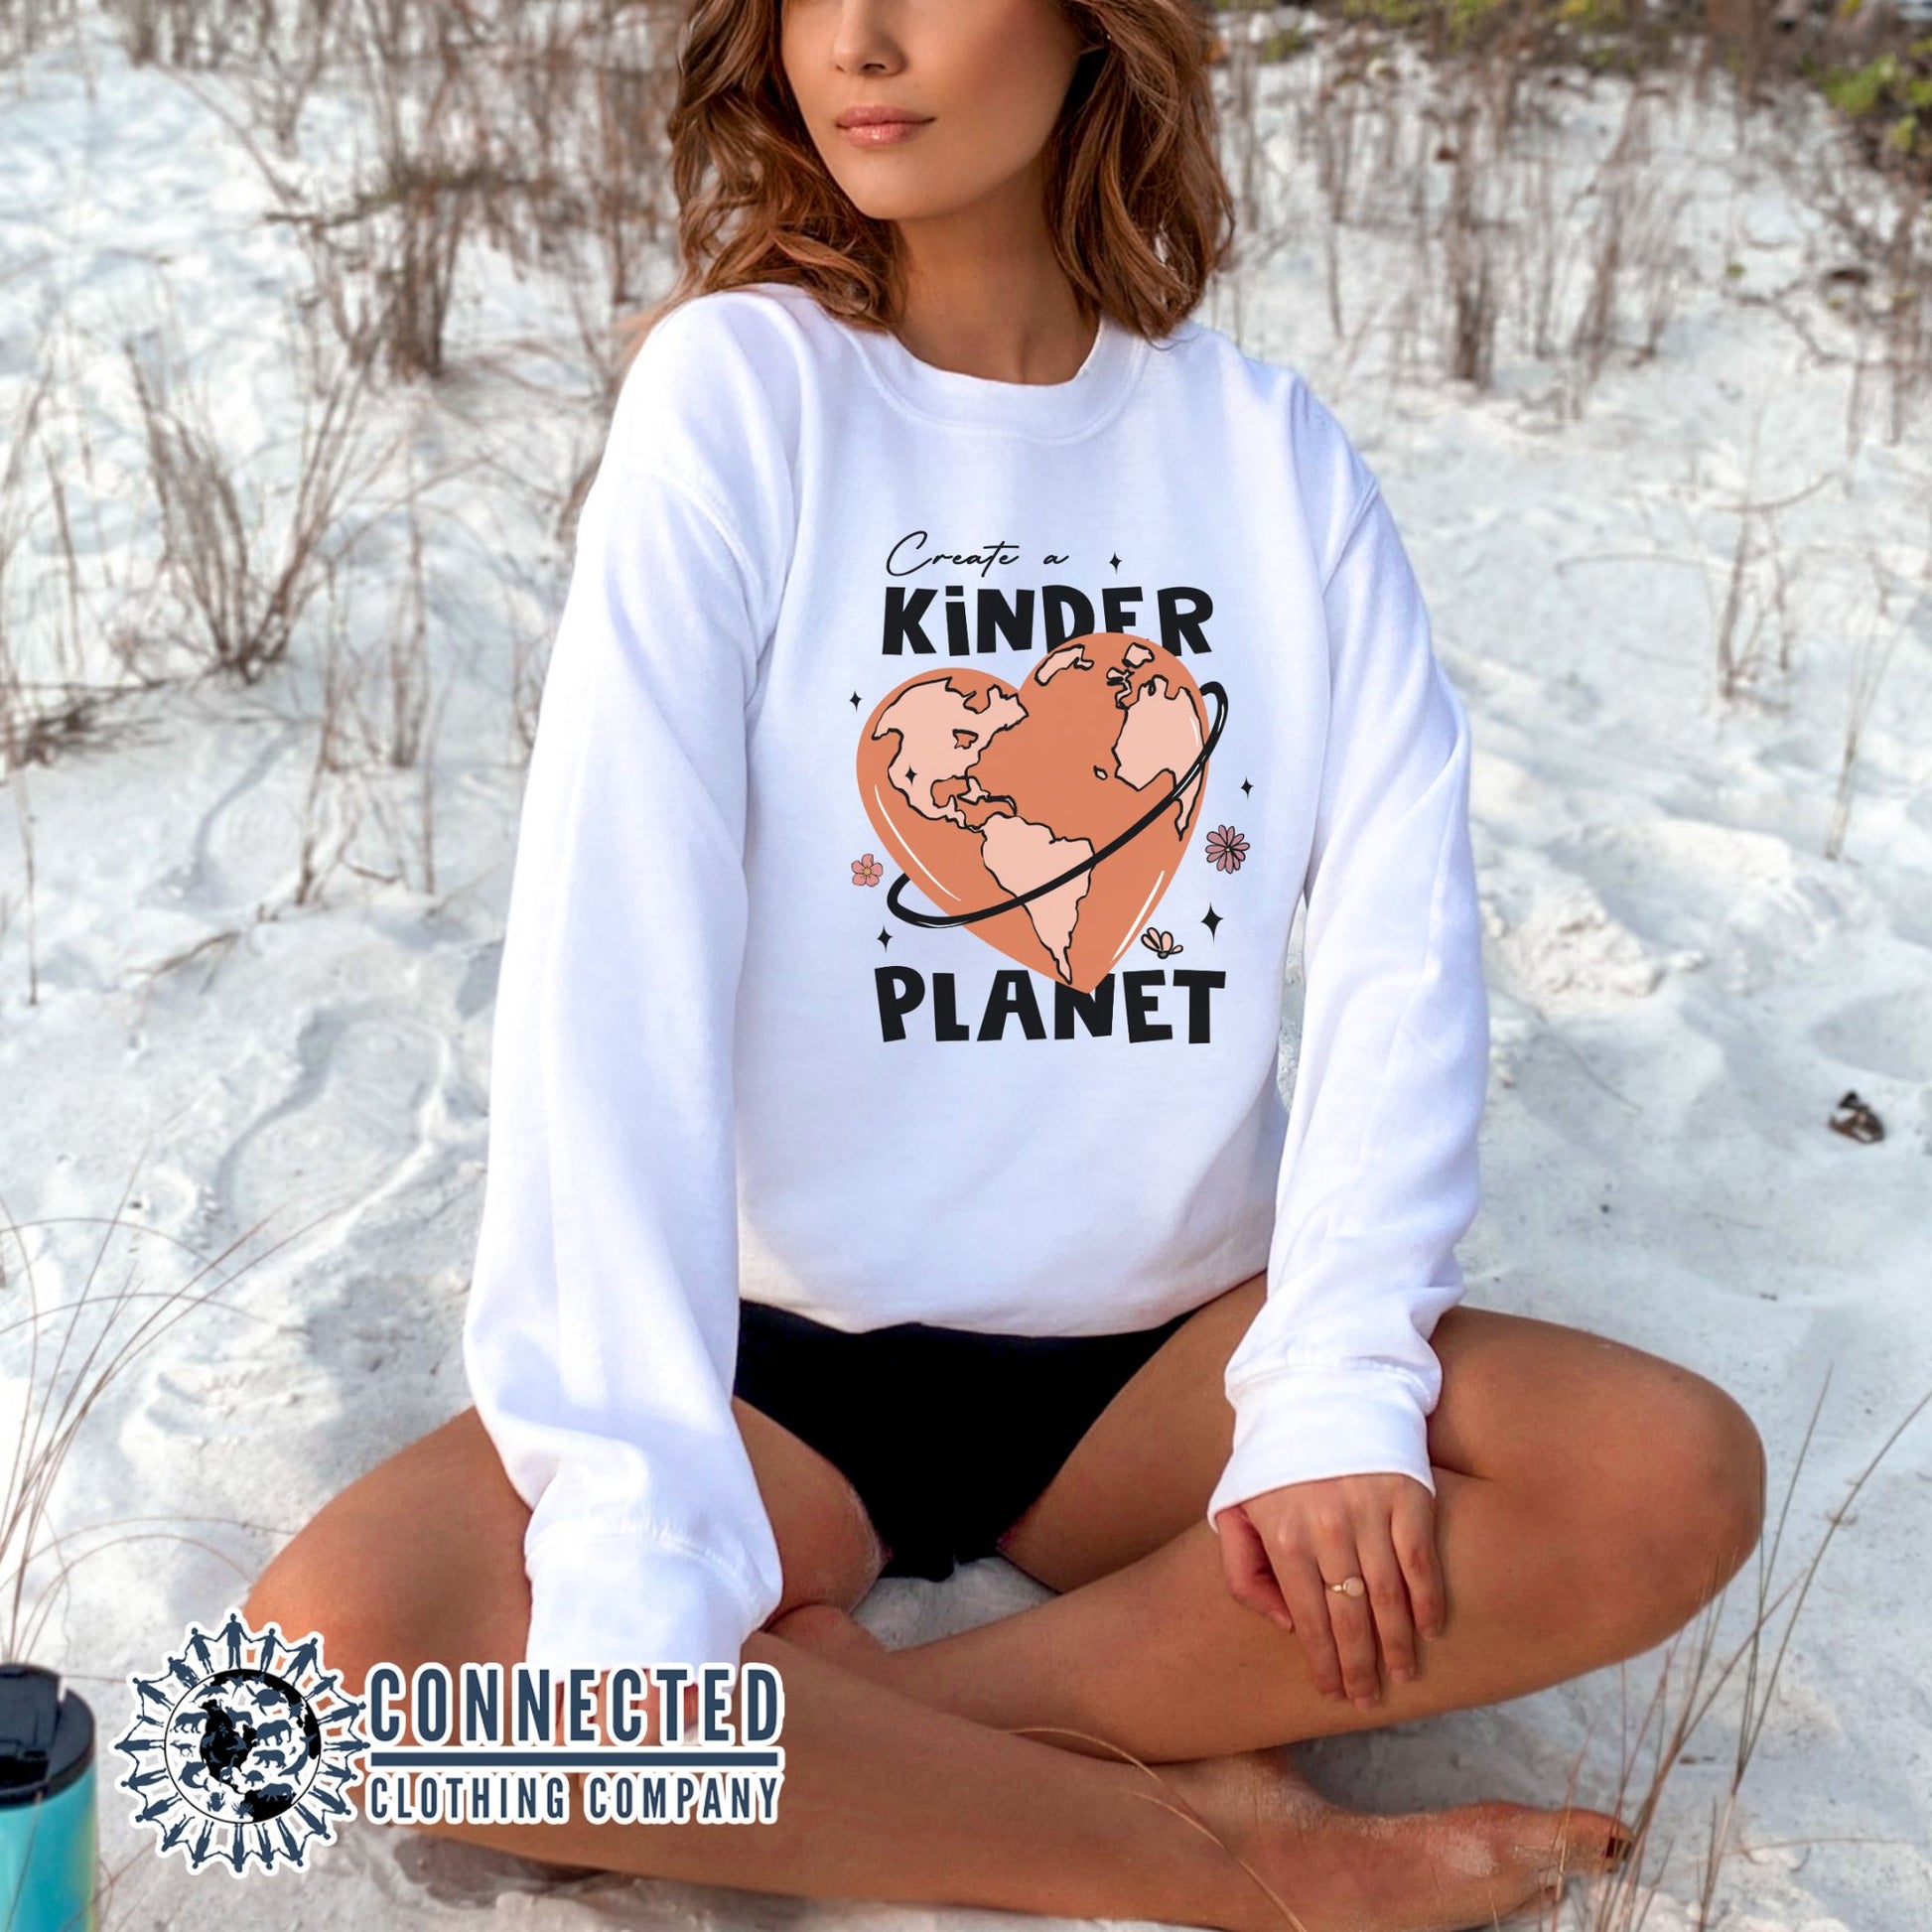 Create A Kinder Planet Crewneck Sweatshirt - Connected Clothing Company - 10% donated to ocean conservation